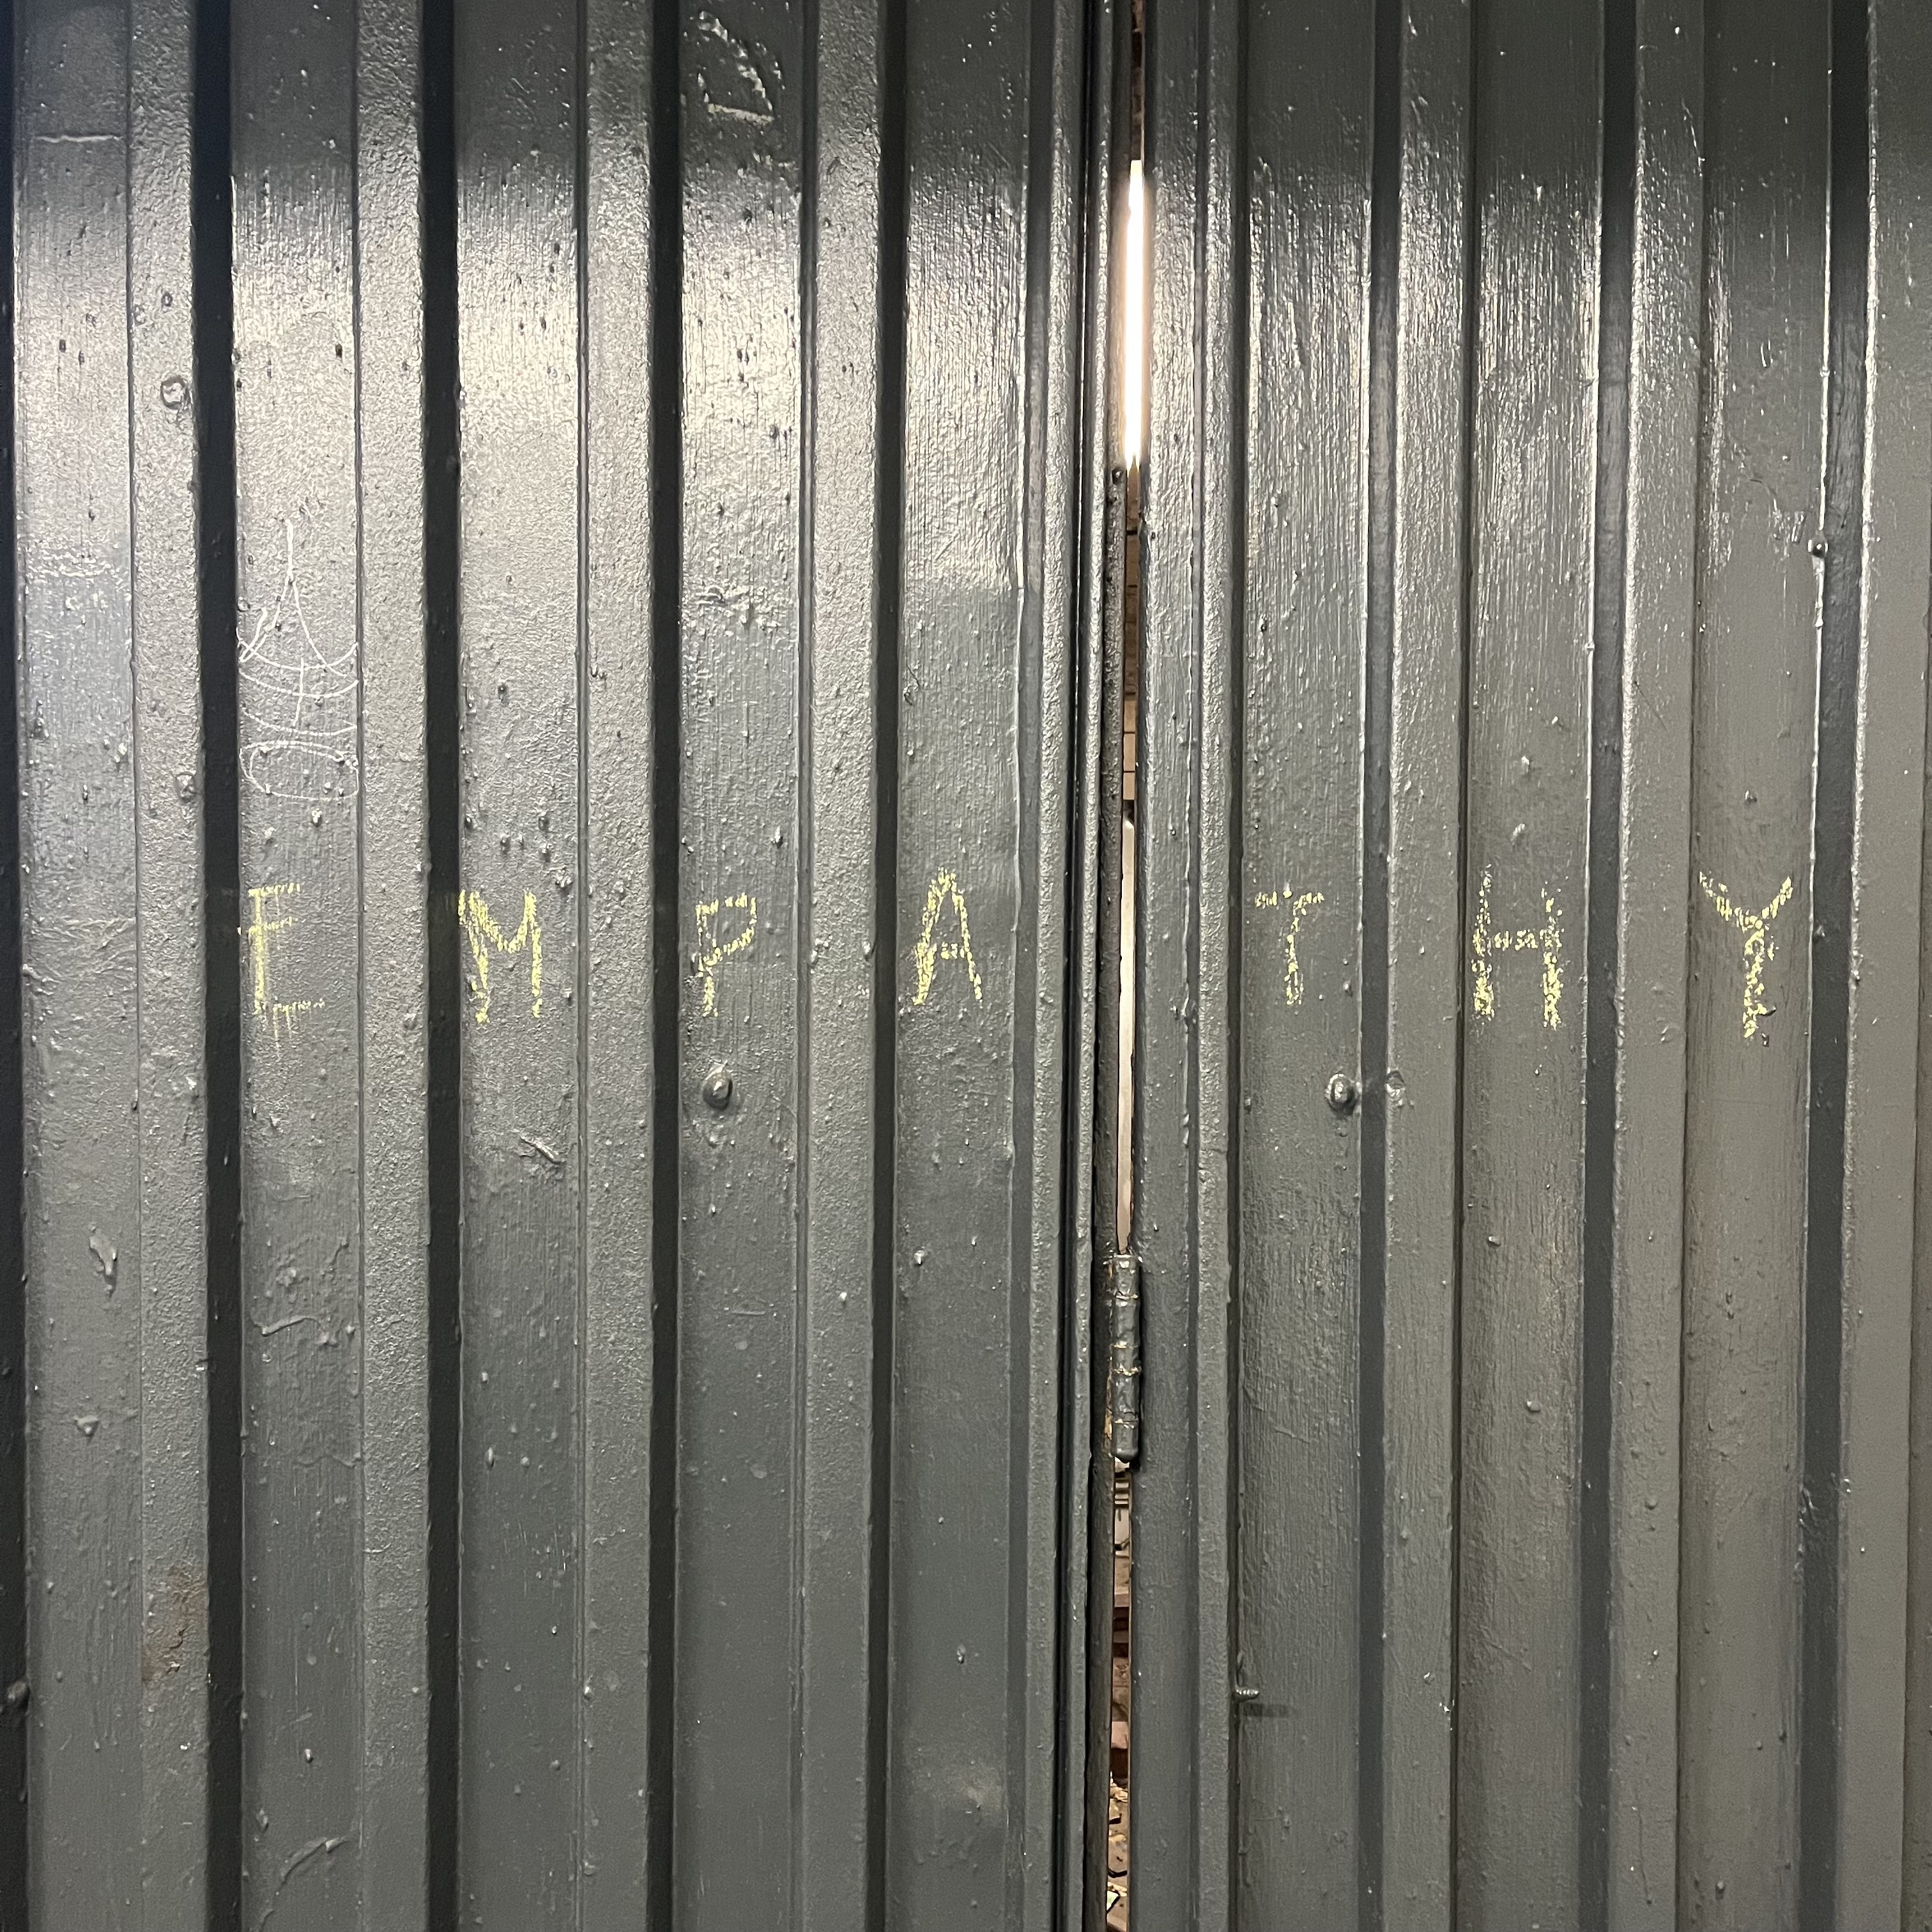 Empathy in the subway. 7th Ave Station, Park Slope, Brooklyn